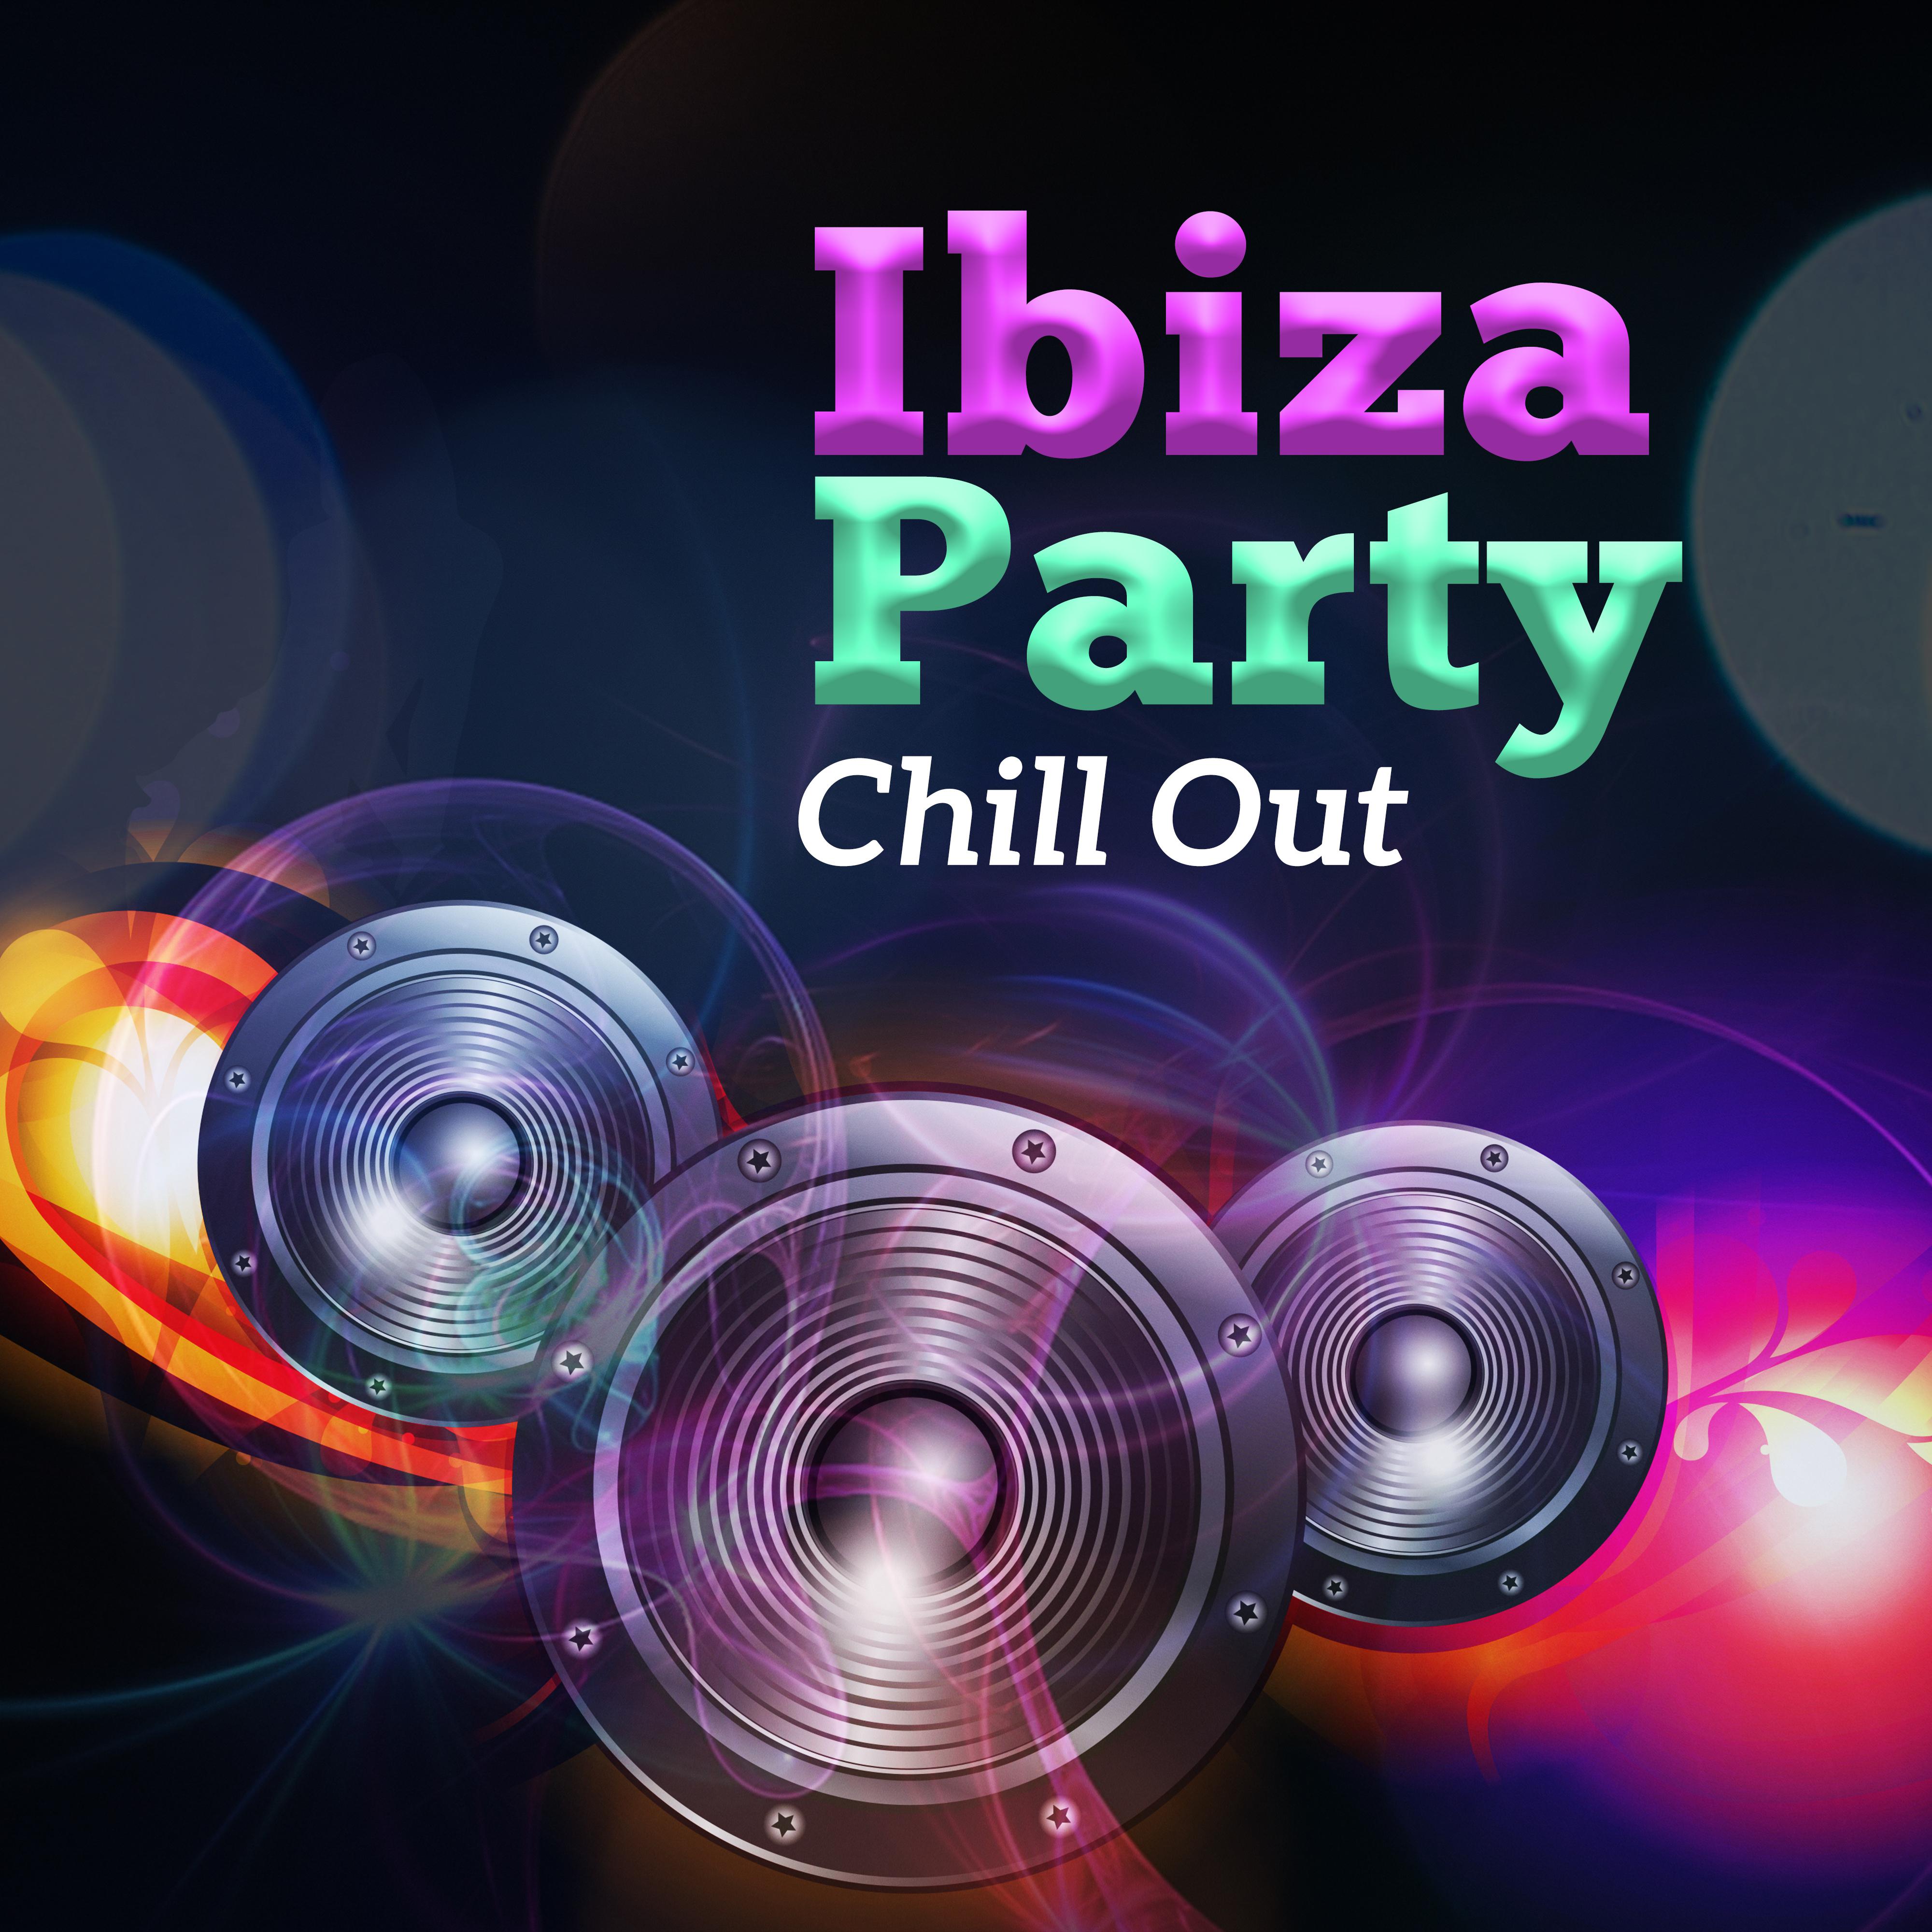 Ibiza Party Chill Out – Summer Fun, Beach Party Music, Electronic Vibes, Peaceful Waves